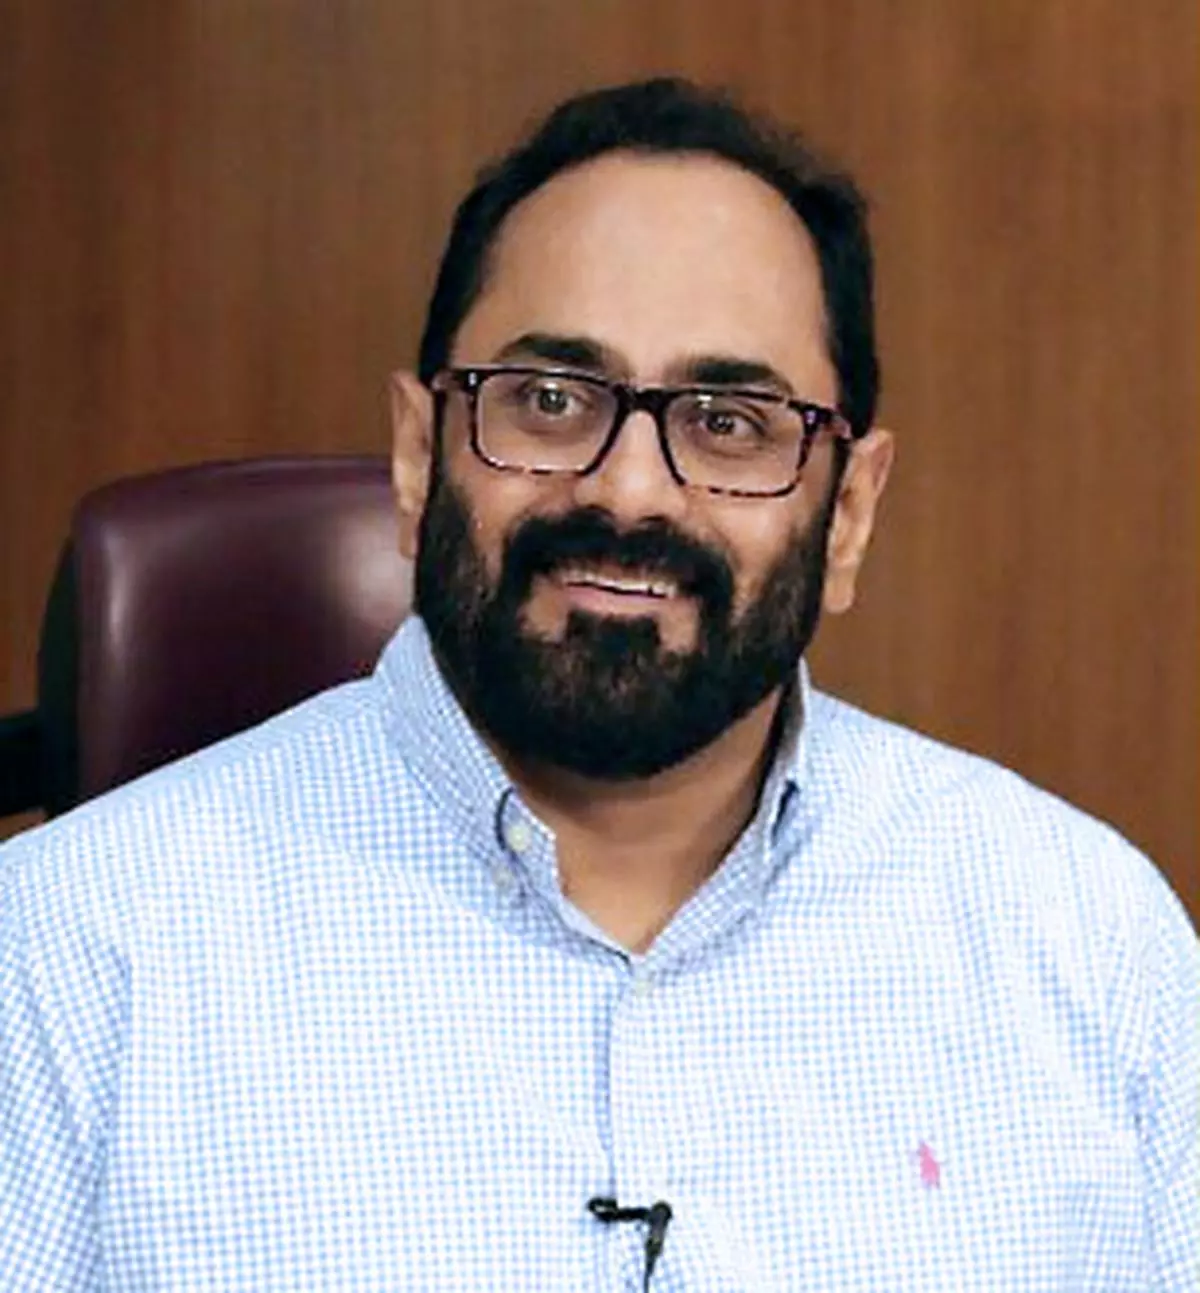  Rajeev Chandrasekhar, Minister of State for Electronics and IT